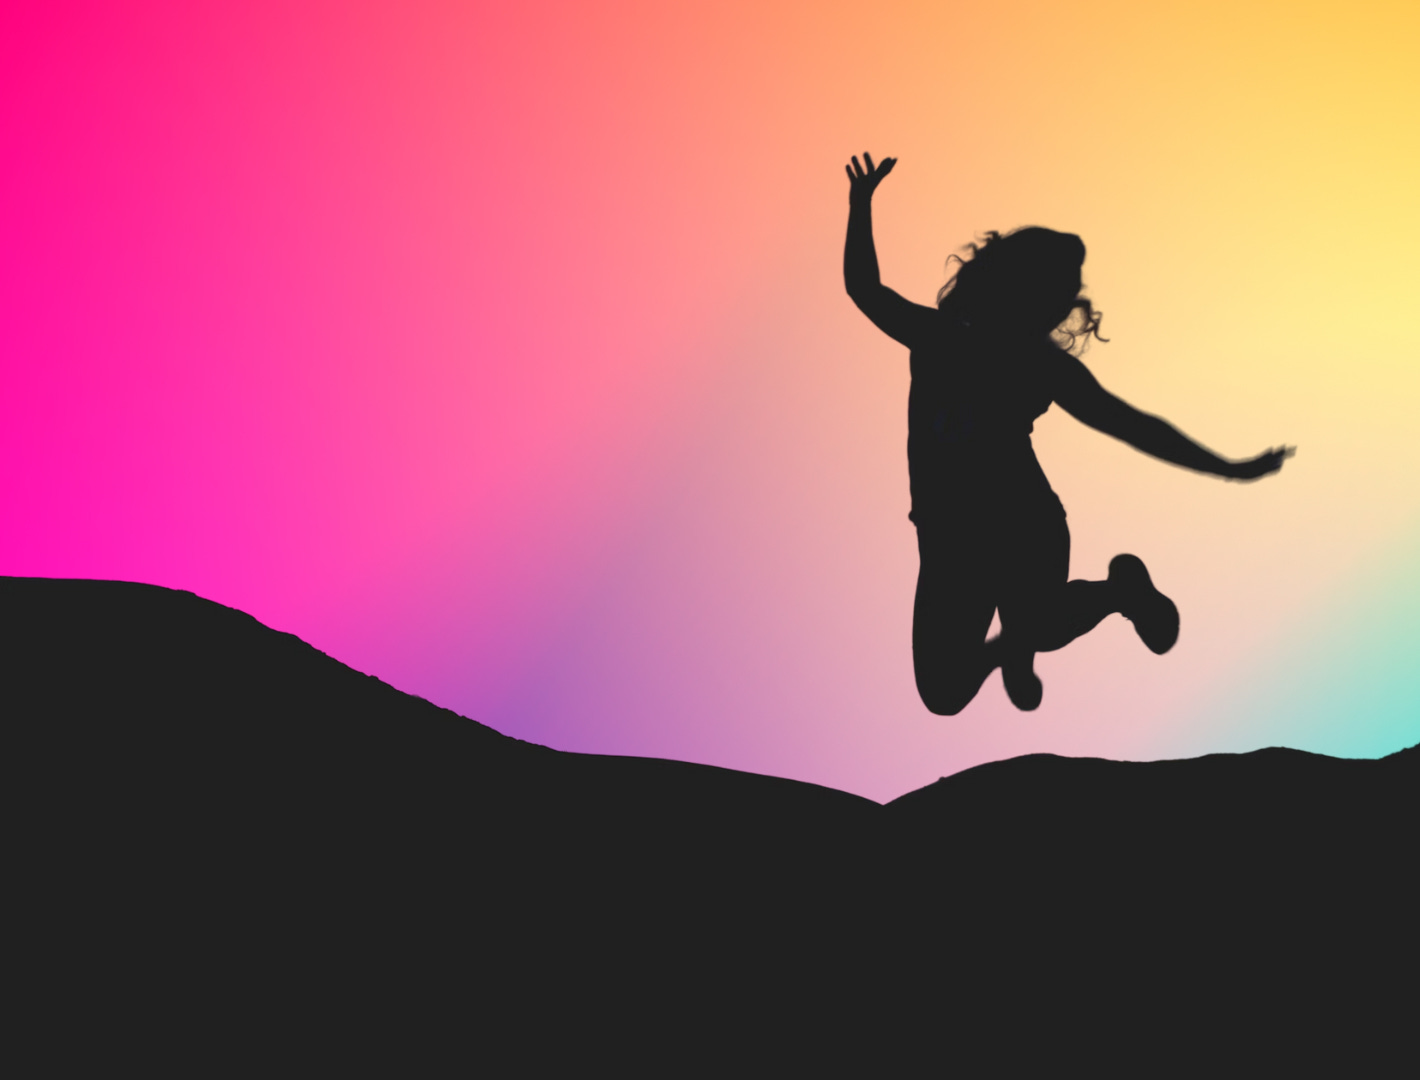 A woman jumping because she has found the balance between Hedonic and Eudaimonic happiness